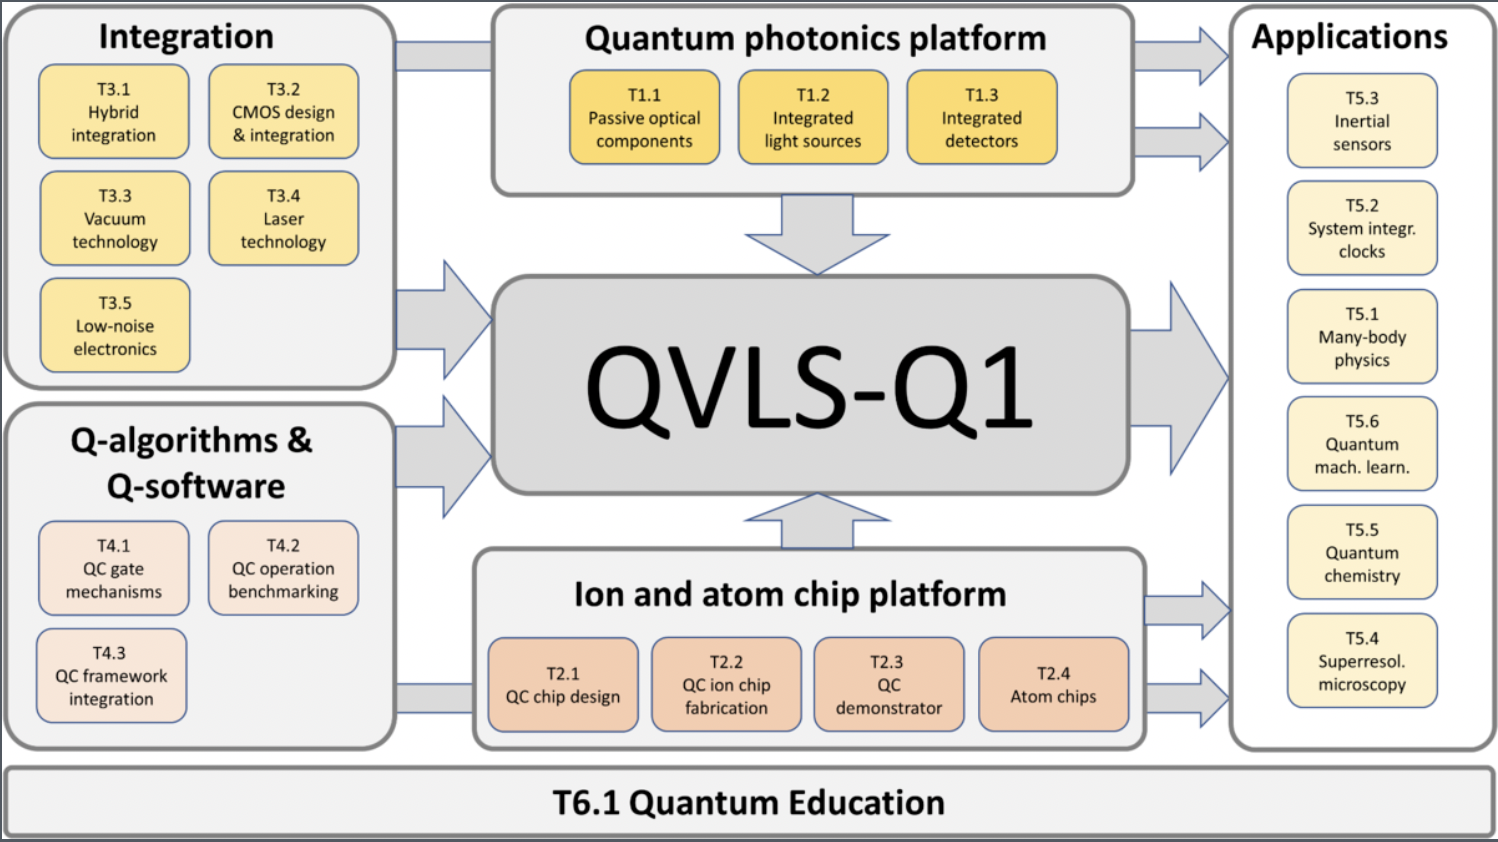 QVLS project Overview and interaction between different teams.